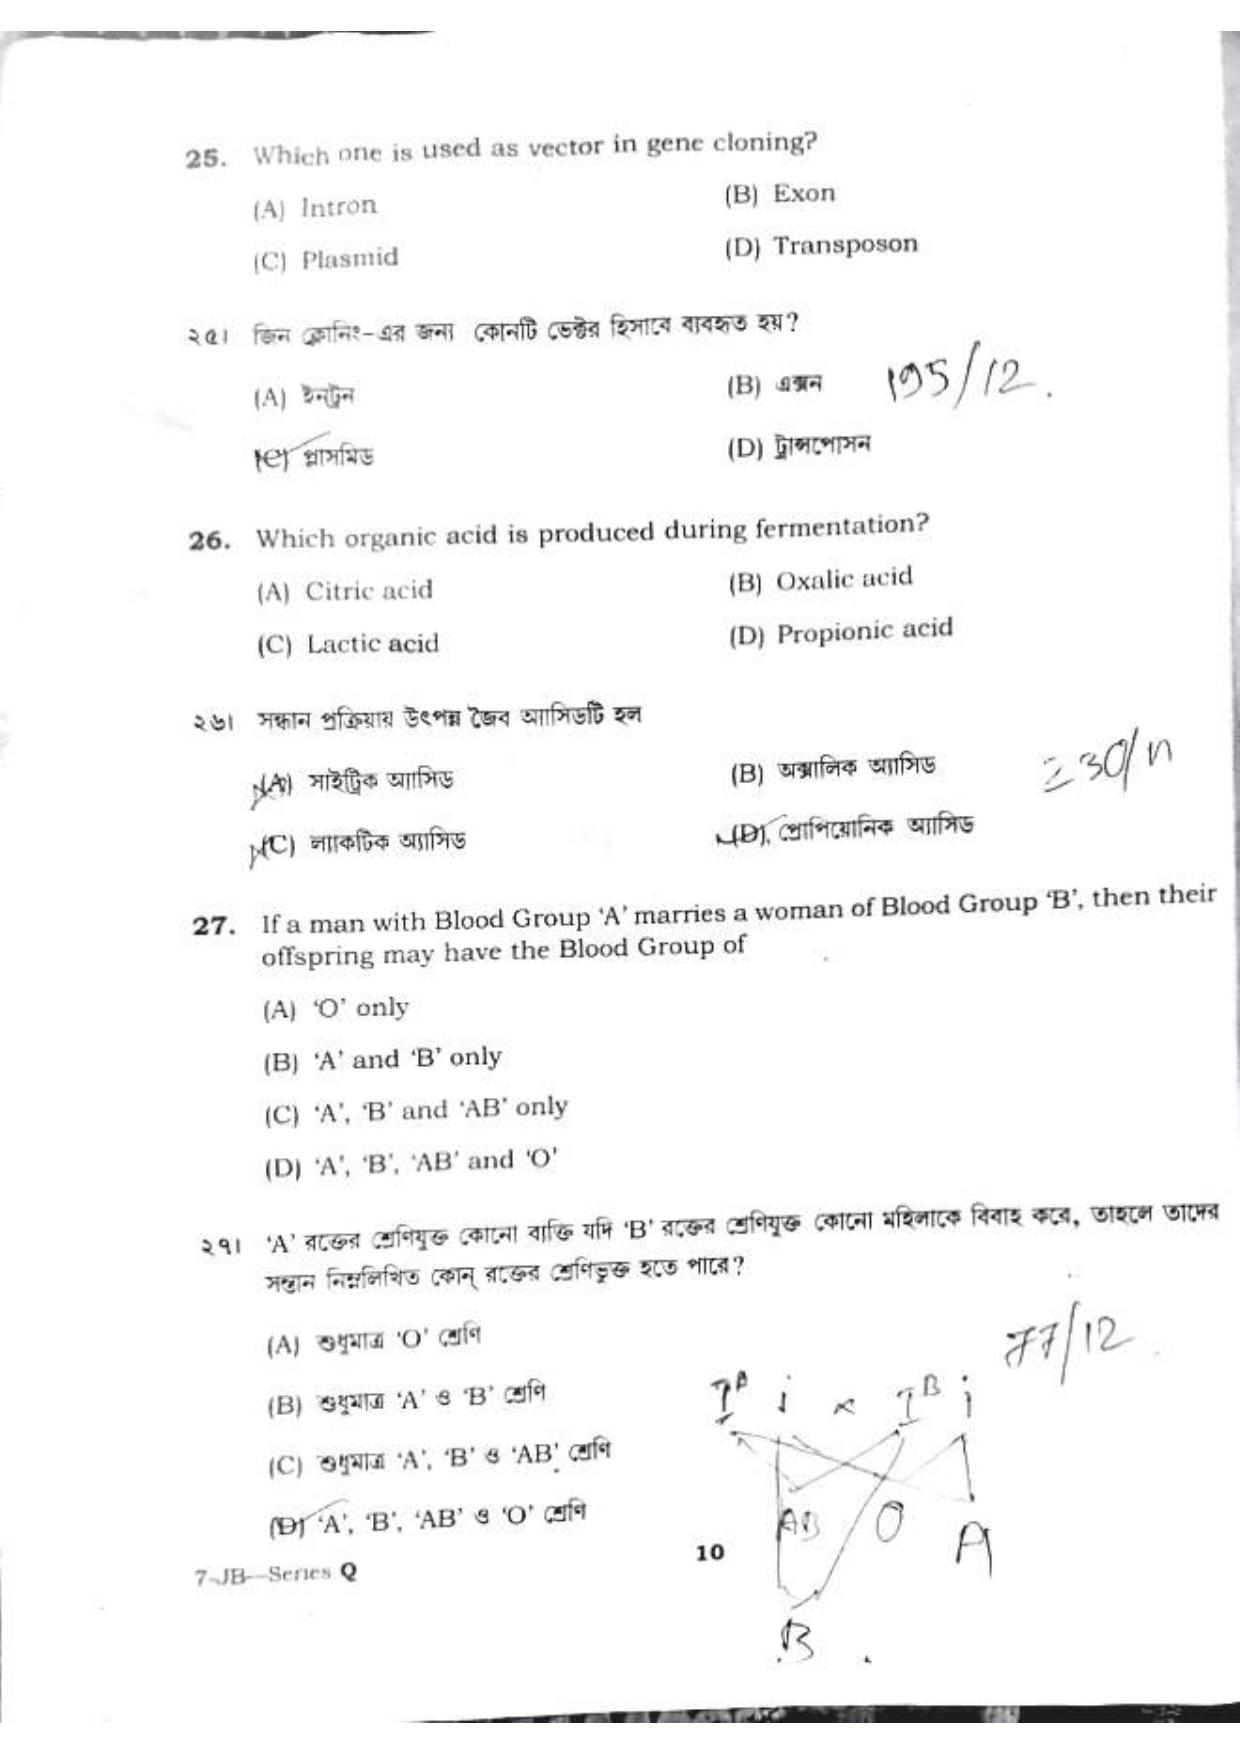 TBJEE Question Paper 2023 (Biology) - Page 10